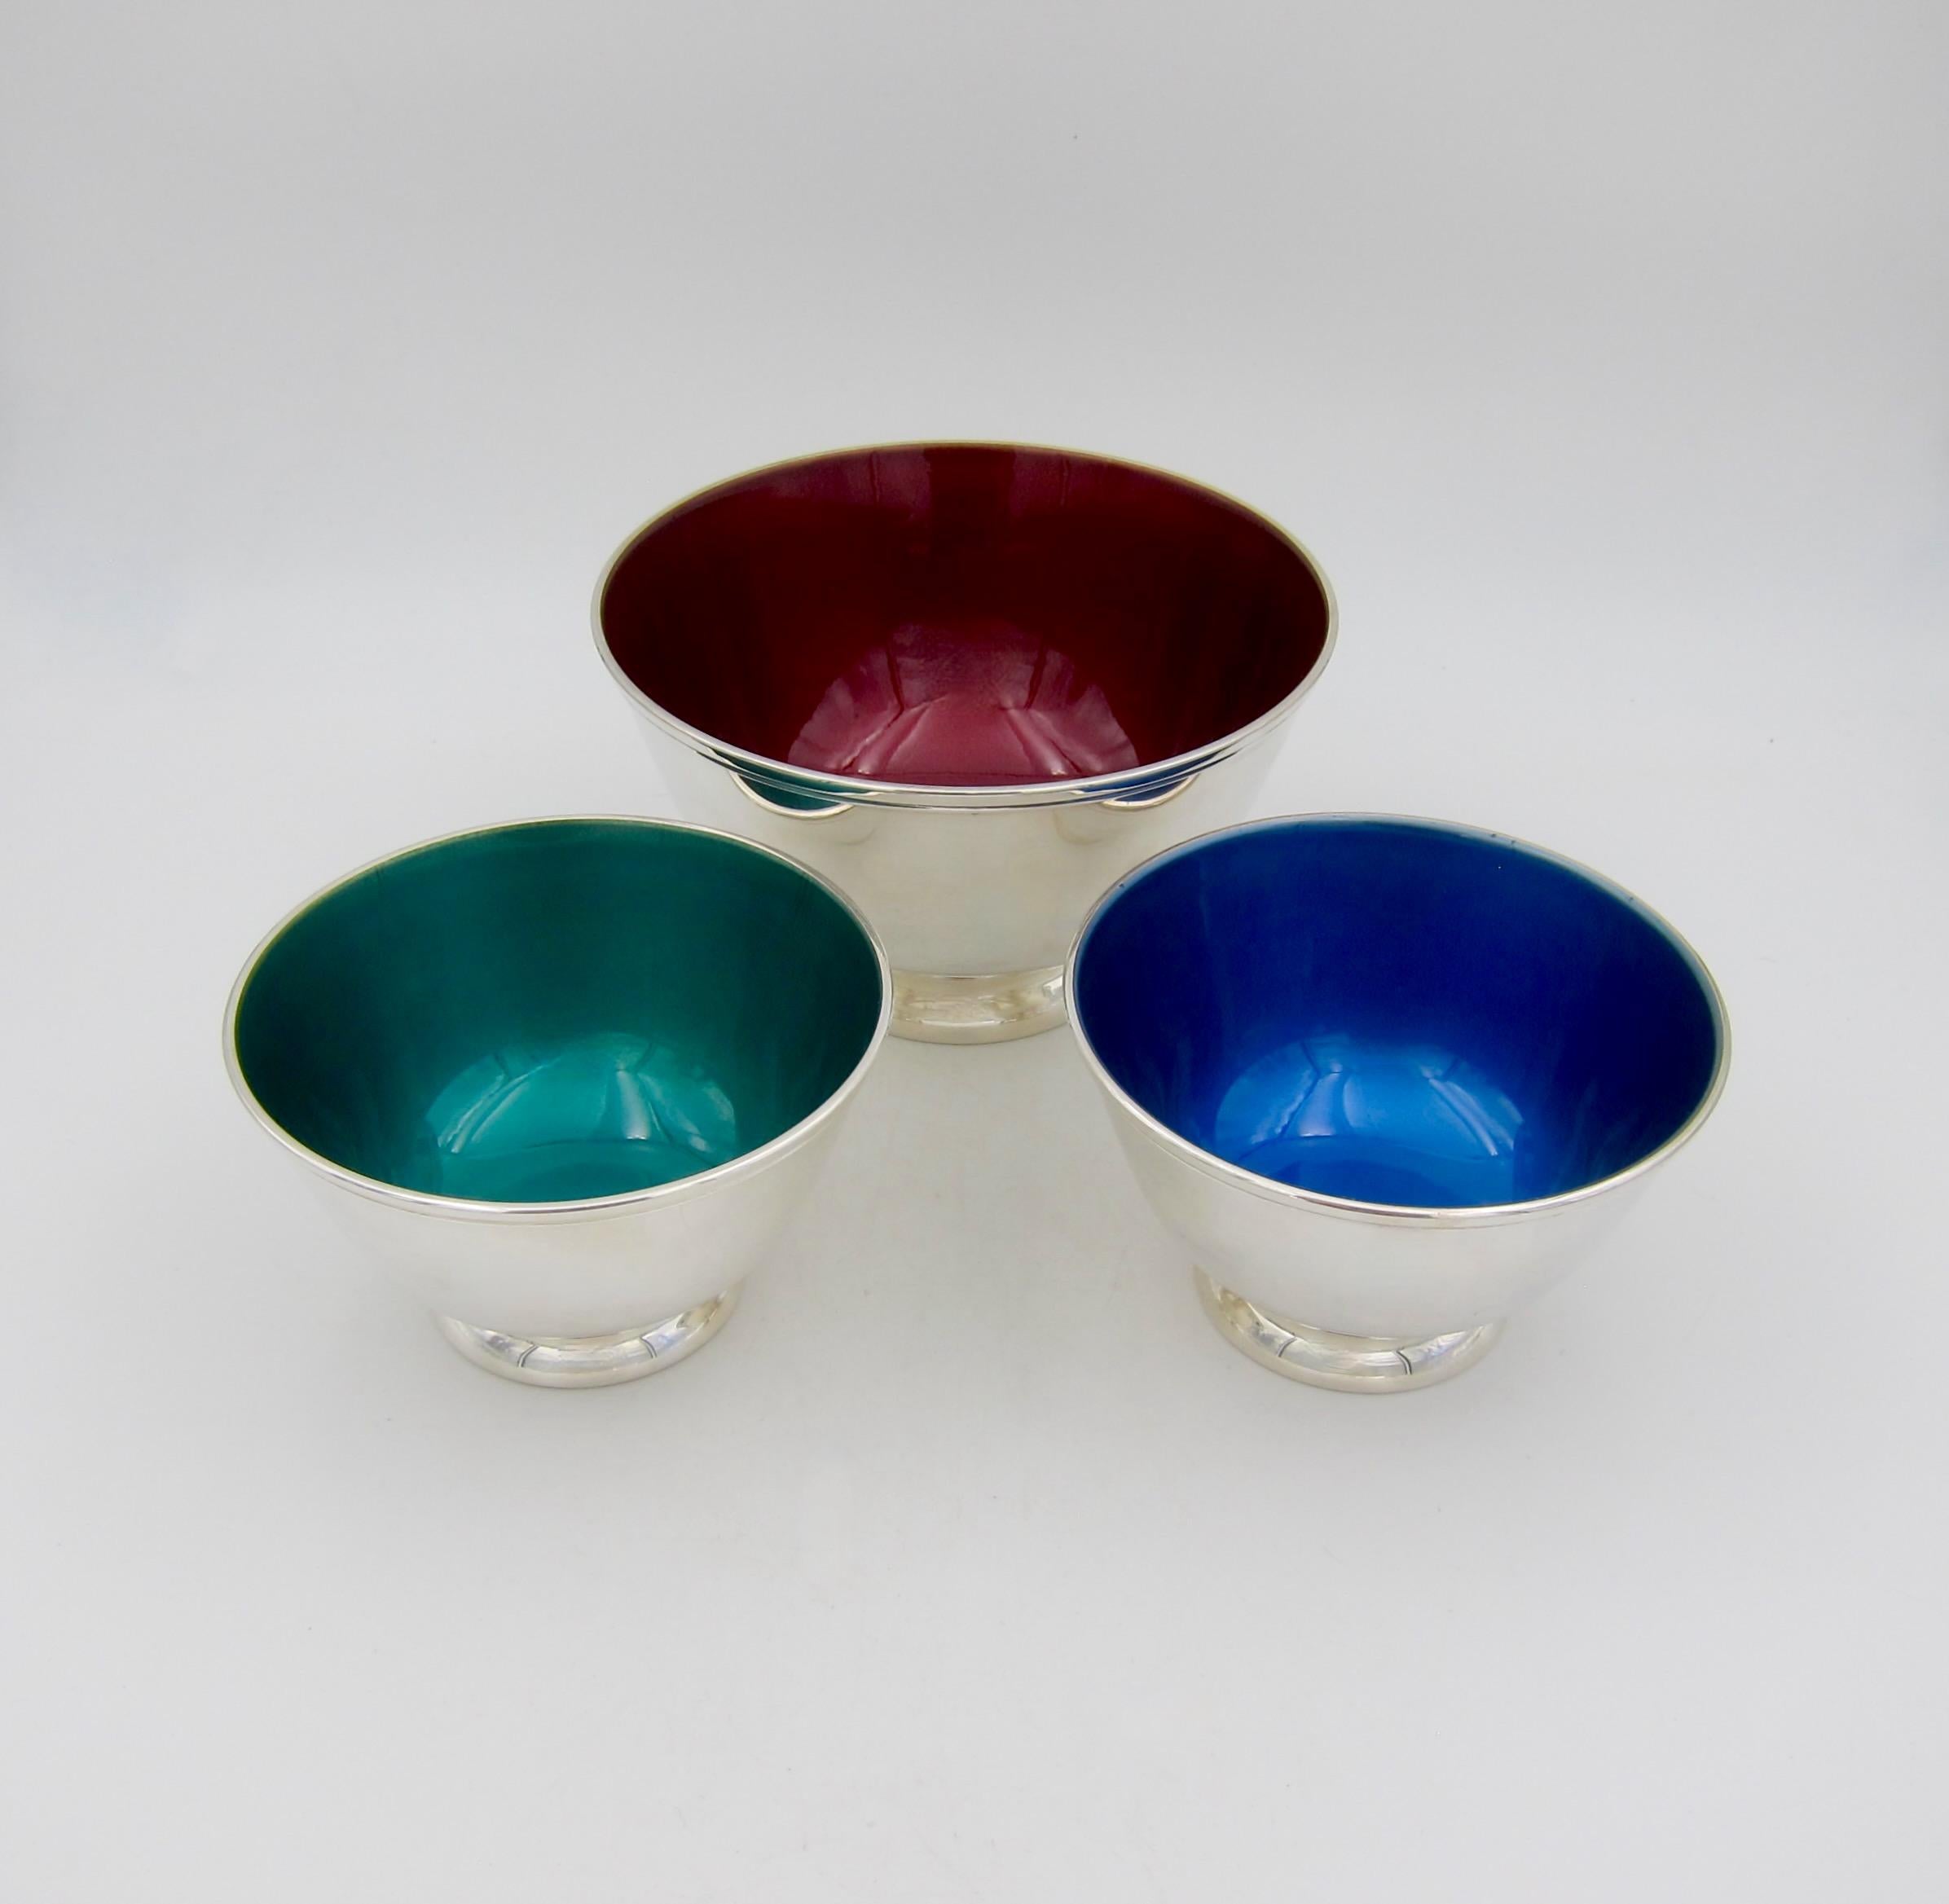 A set of three American footed bowls in silver-plate with gorgeous jewel-toned enamel interiors from Towle Silversmiths of Newburyport, Massachusetts. The colorful vintage bowls were introduced in the 1960s as stylish and versatile accents for the